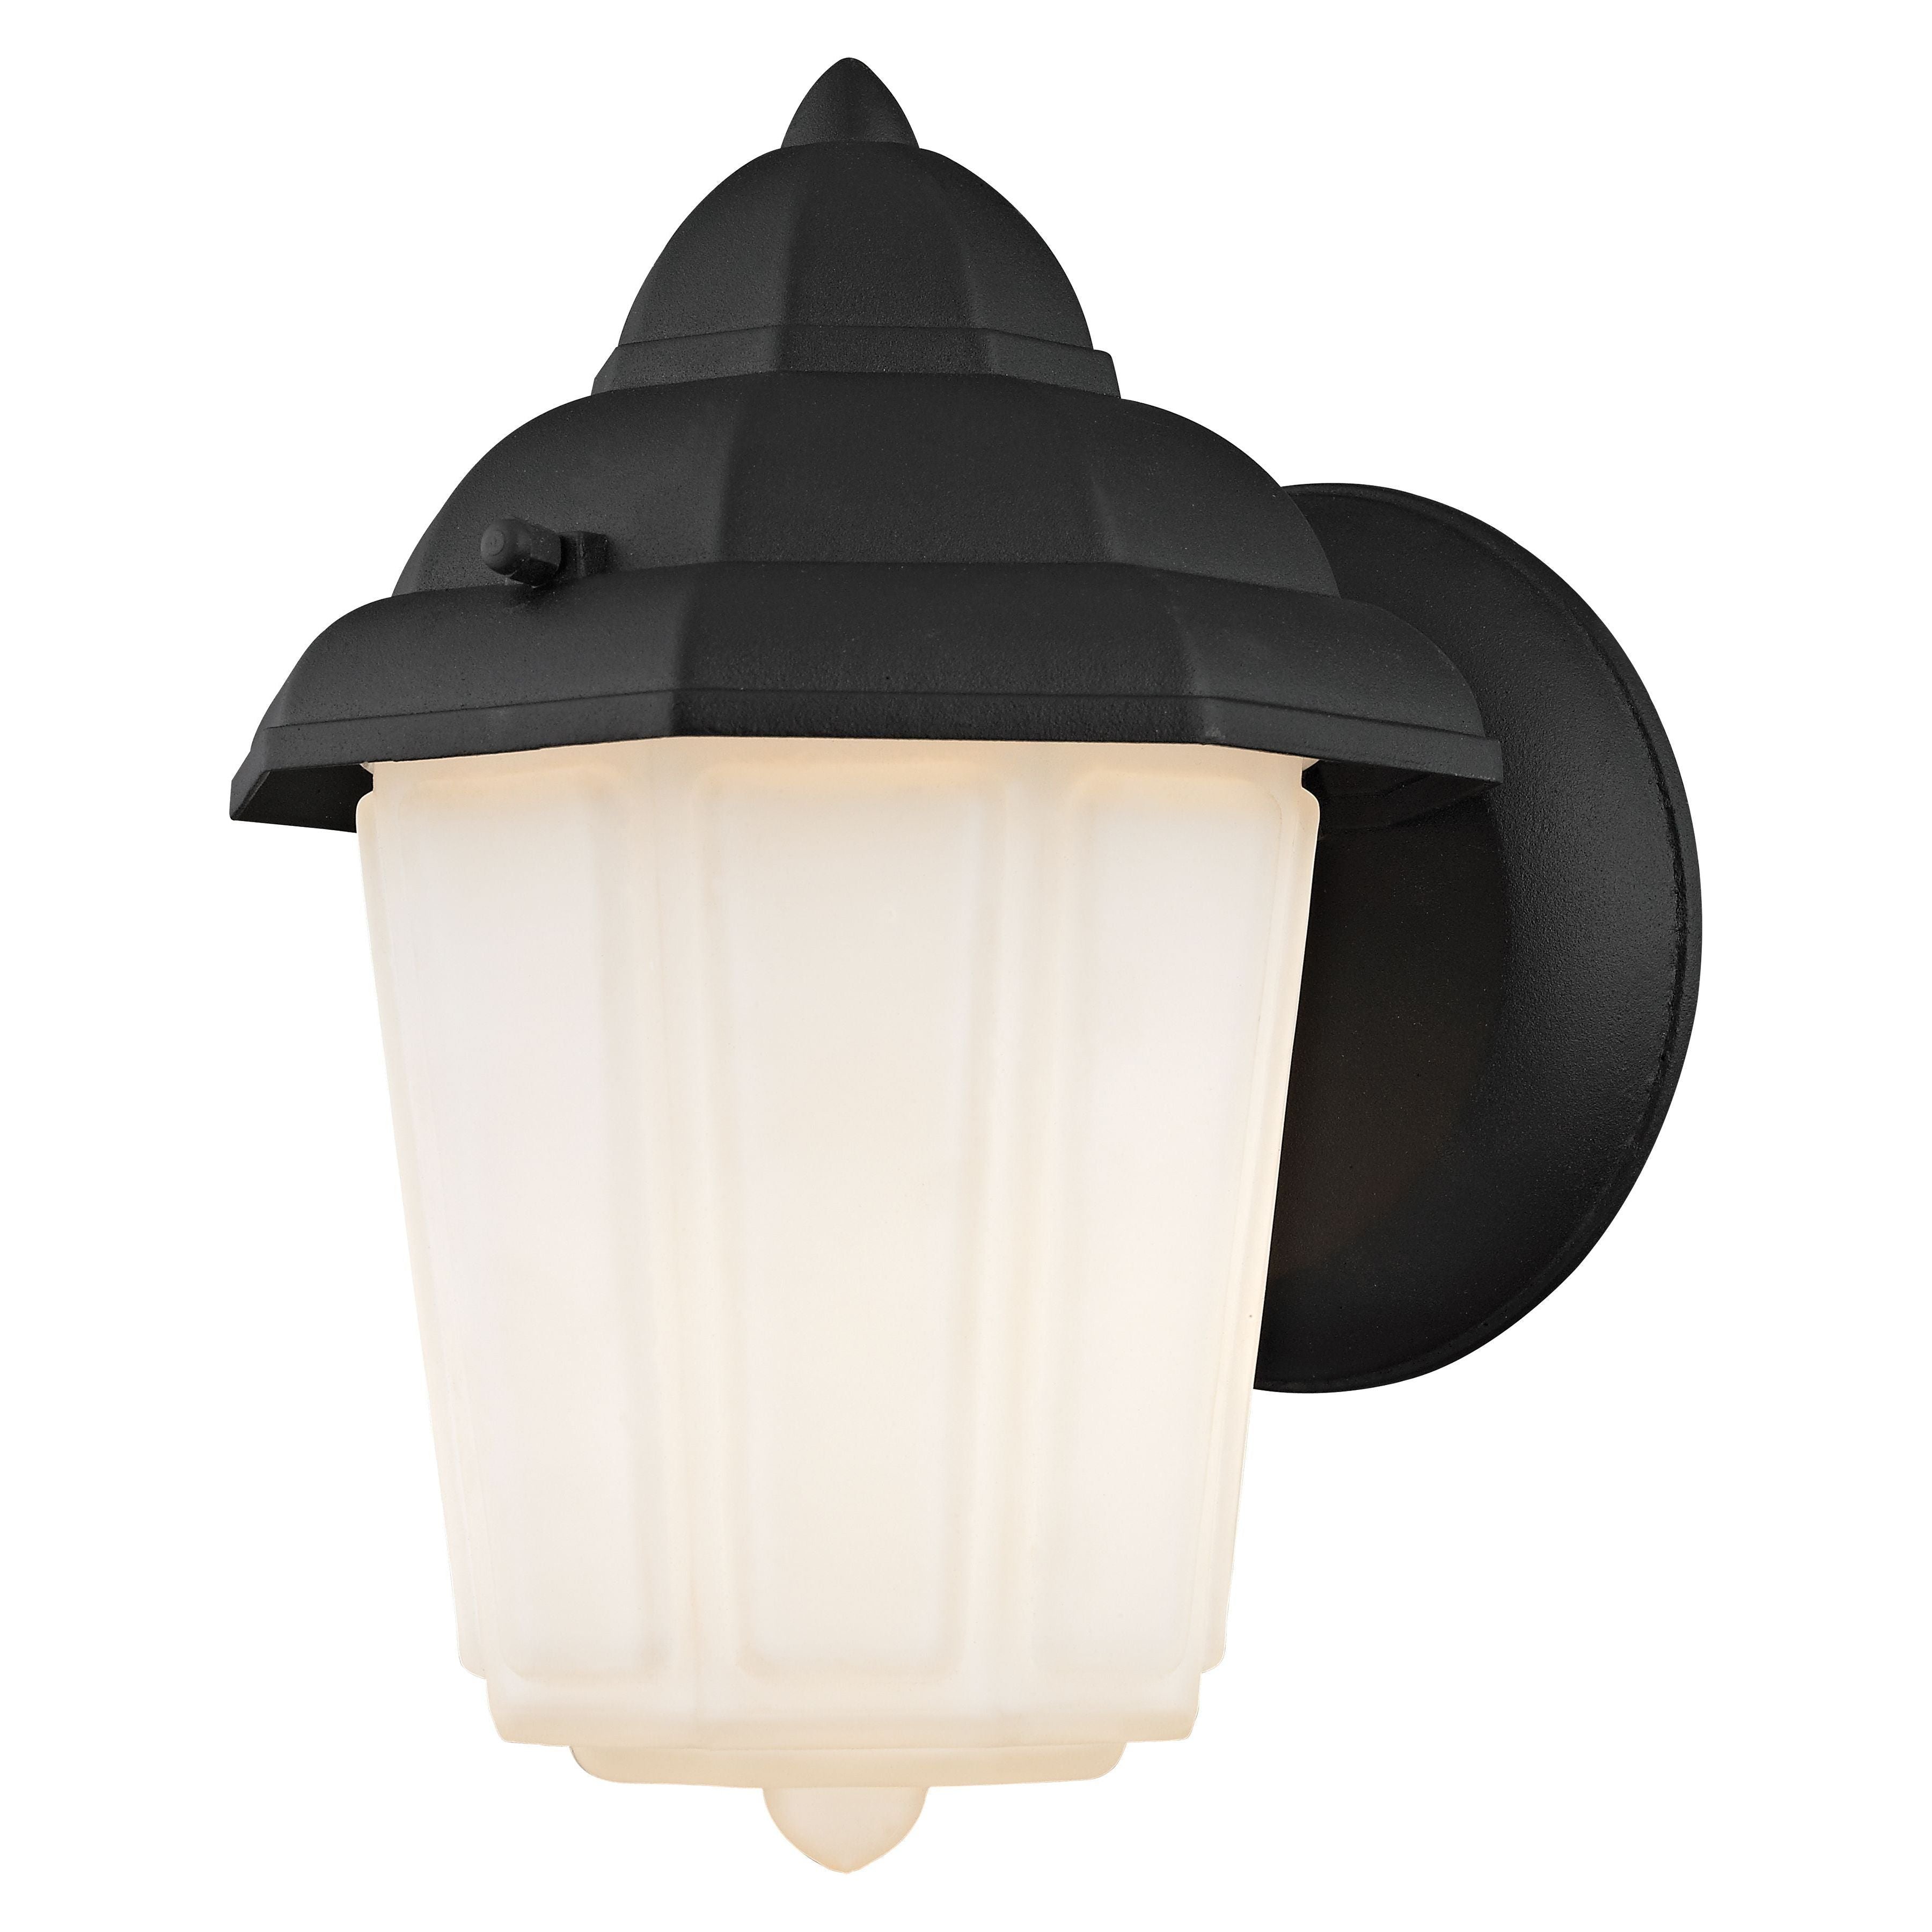 Cotswold 9" High 1-Light Outdoor Sconce